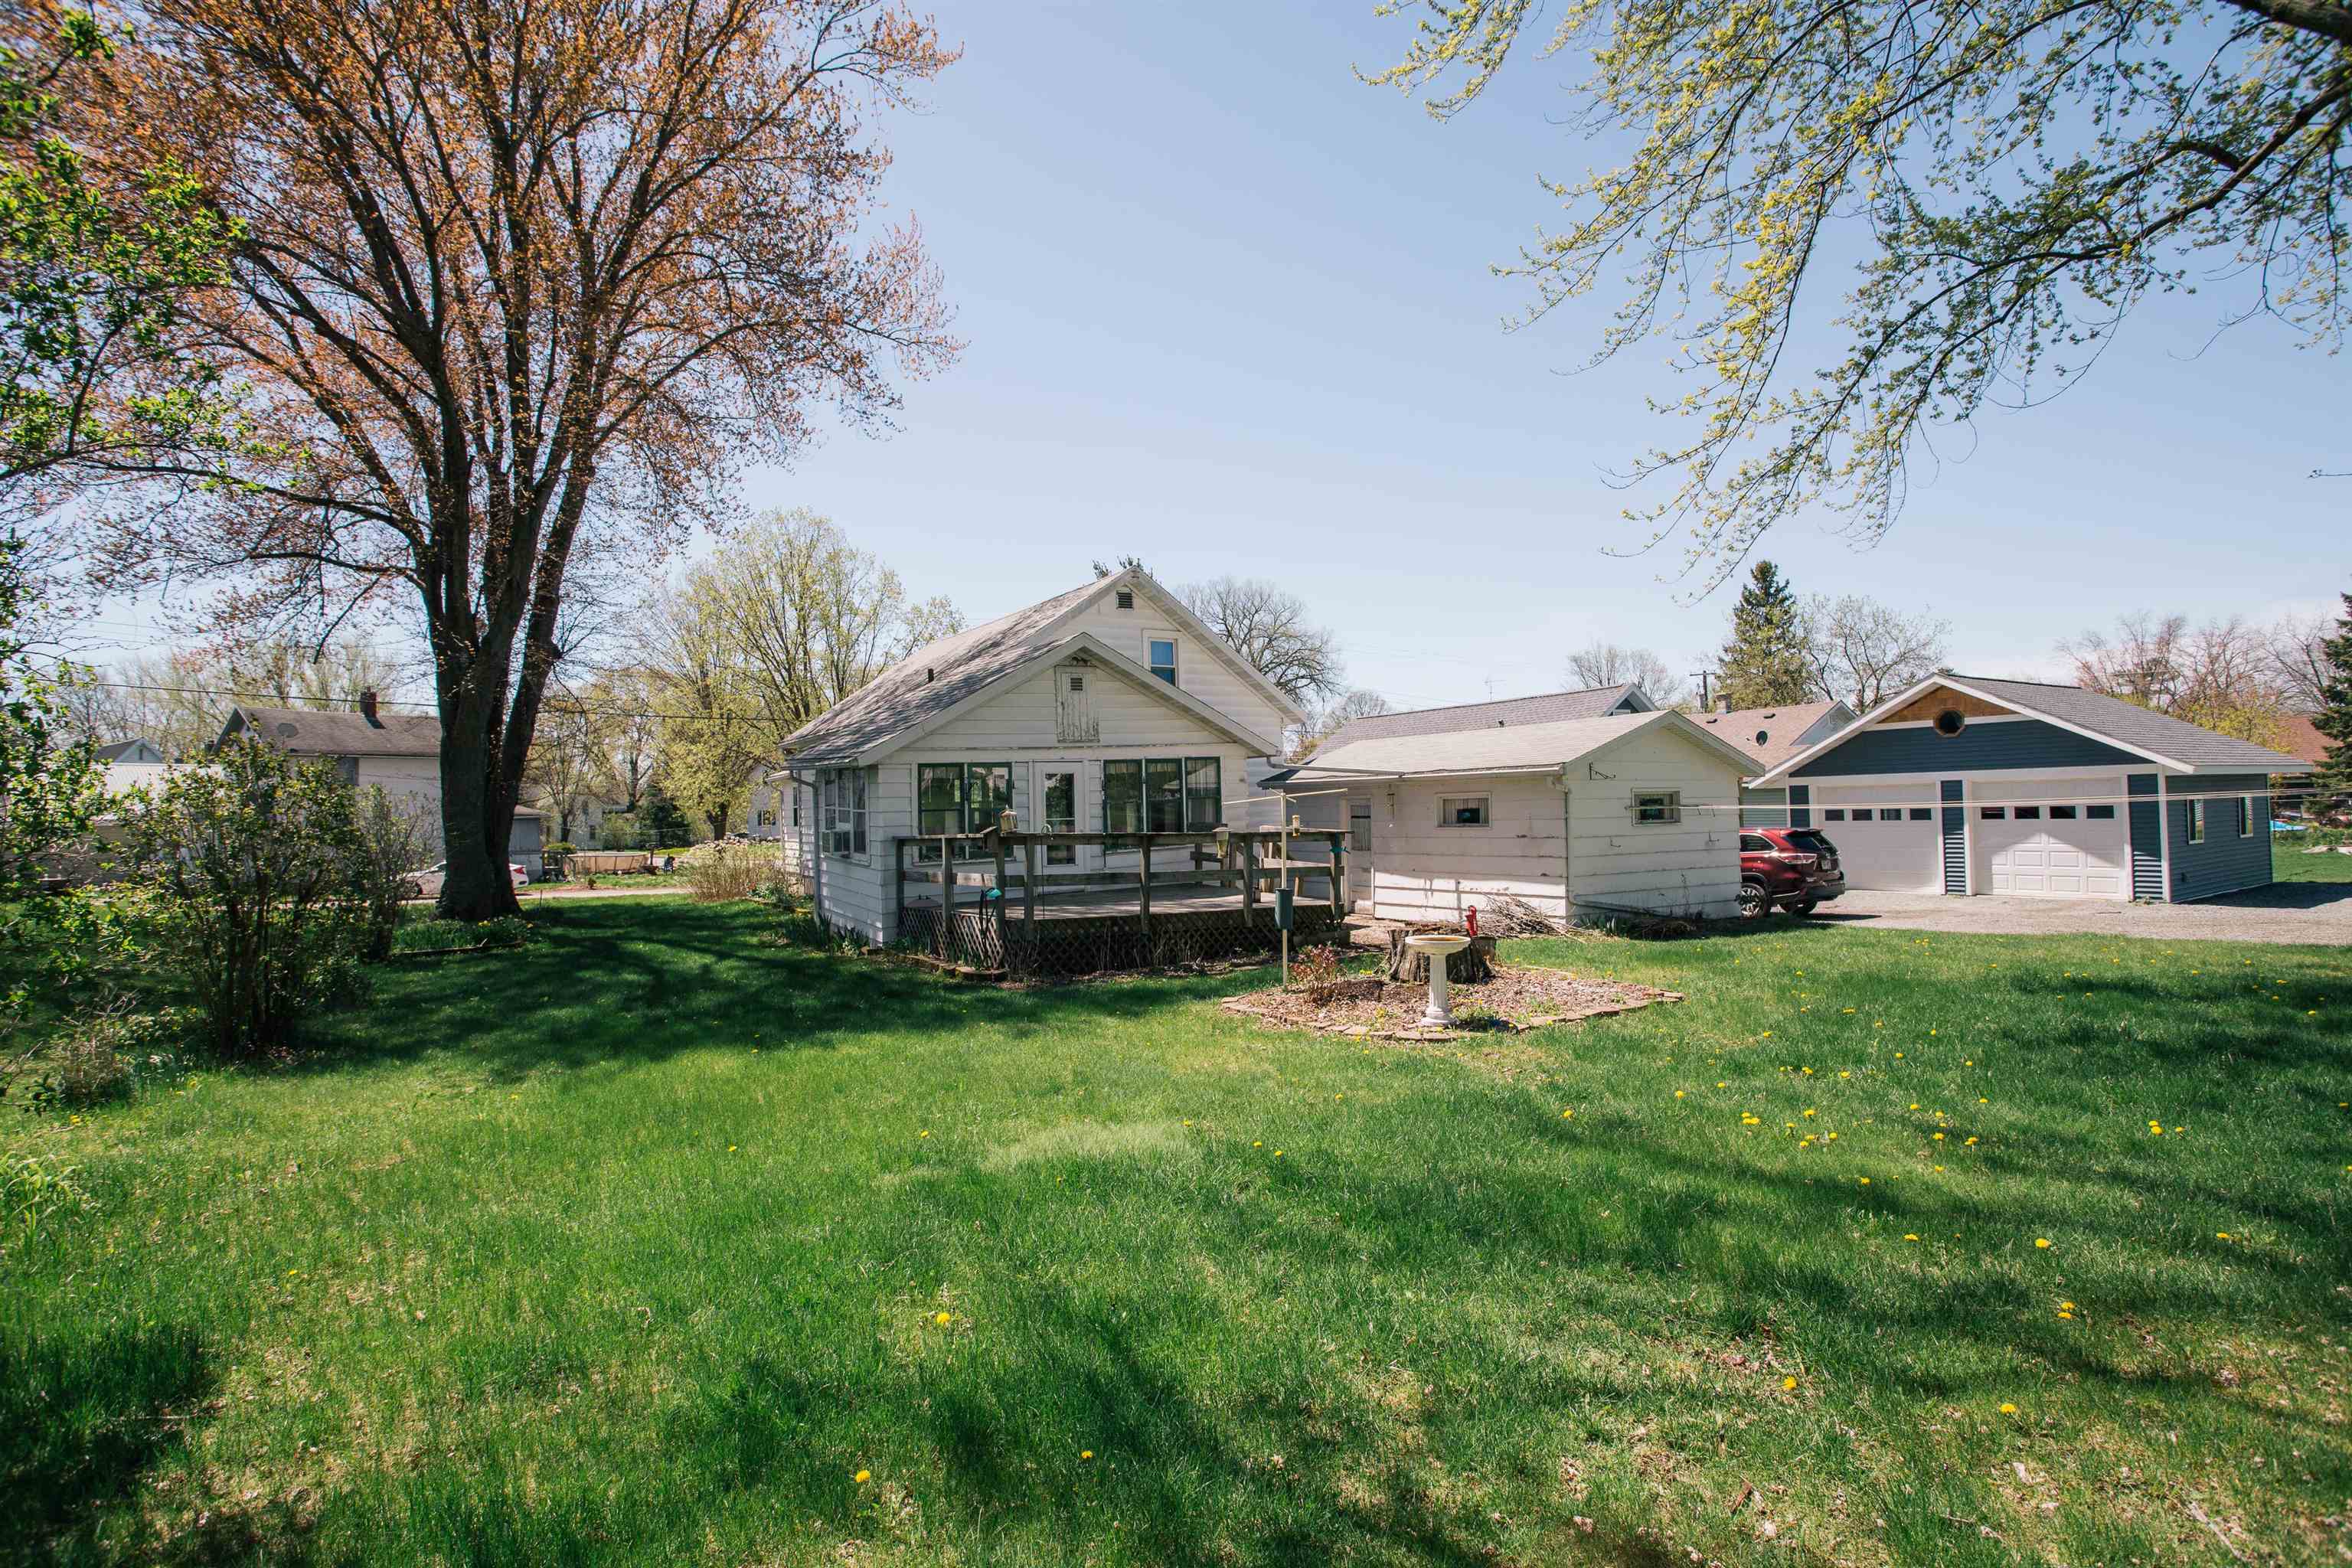 201 E 12TH STREET, Neillsville, Wisconsin 54456, 3 Bedrooms Bedrooms, ,1 BathroomBathrooms,Residential,For Sale,201 E 12TH STREET,22401709